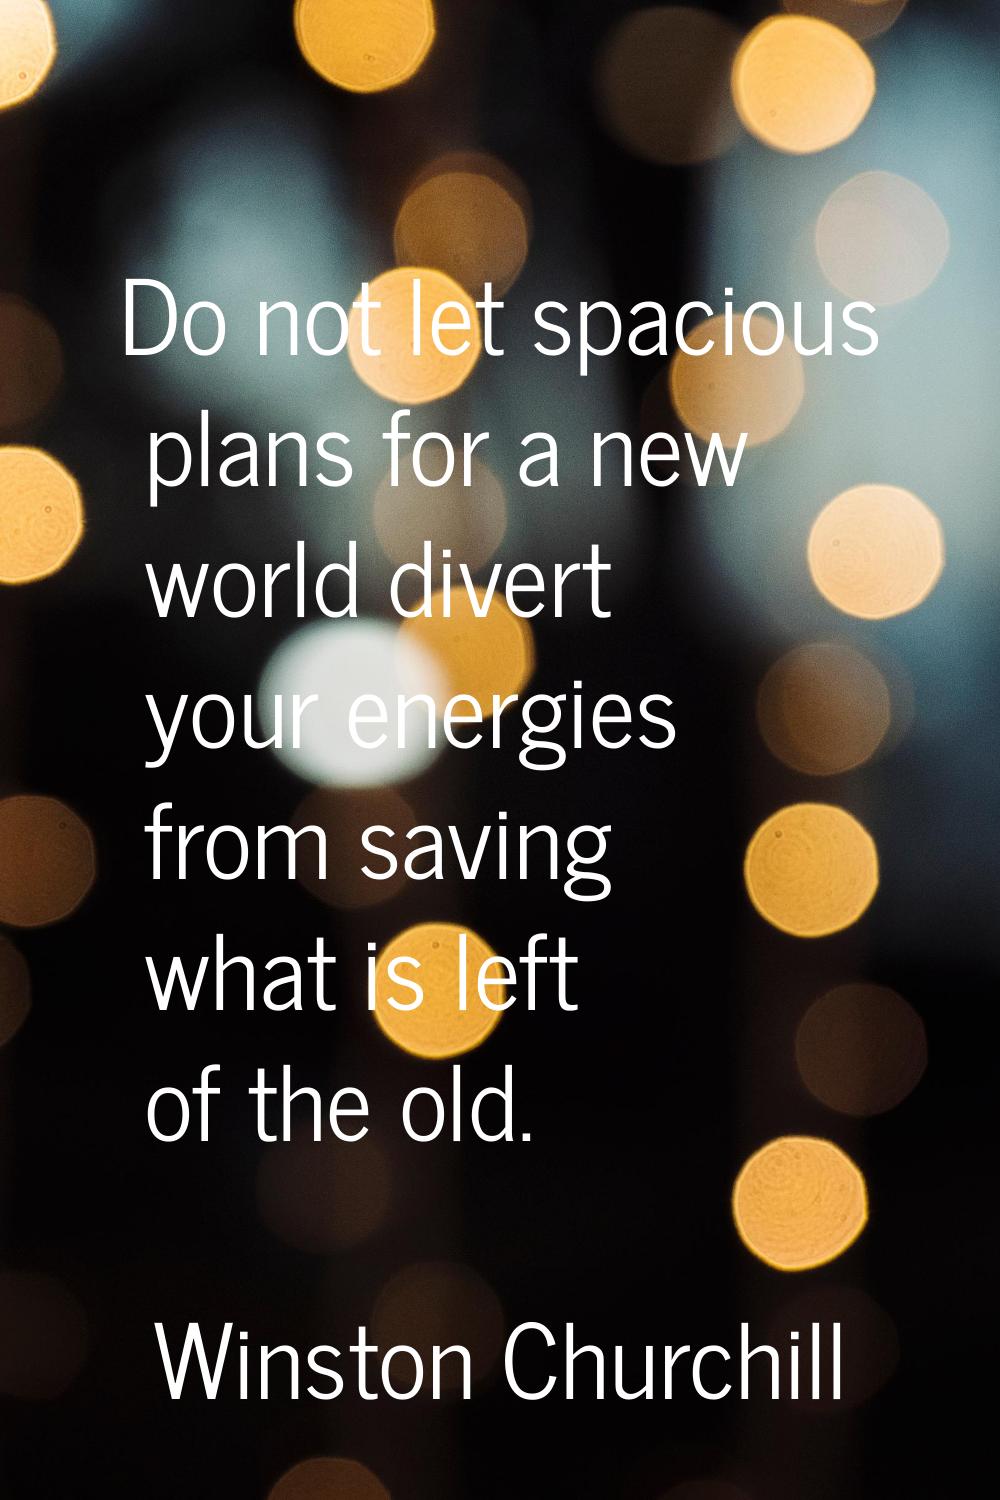 Do not let spacious plans for a new world divert your energies from saving what is left of the old.